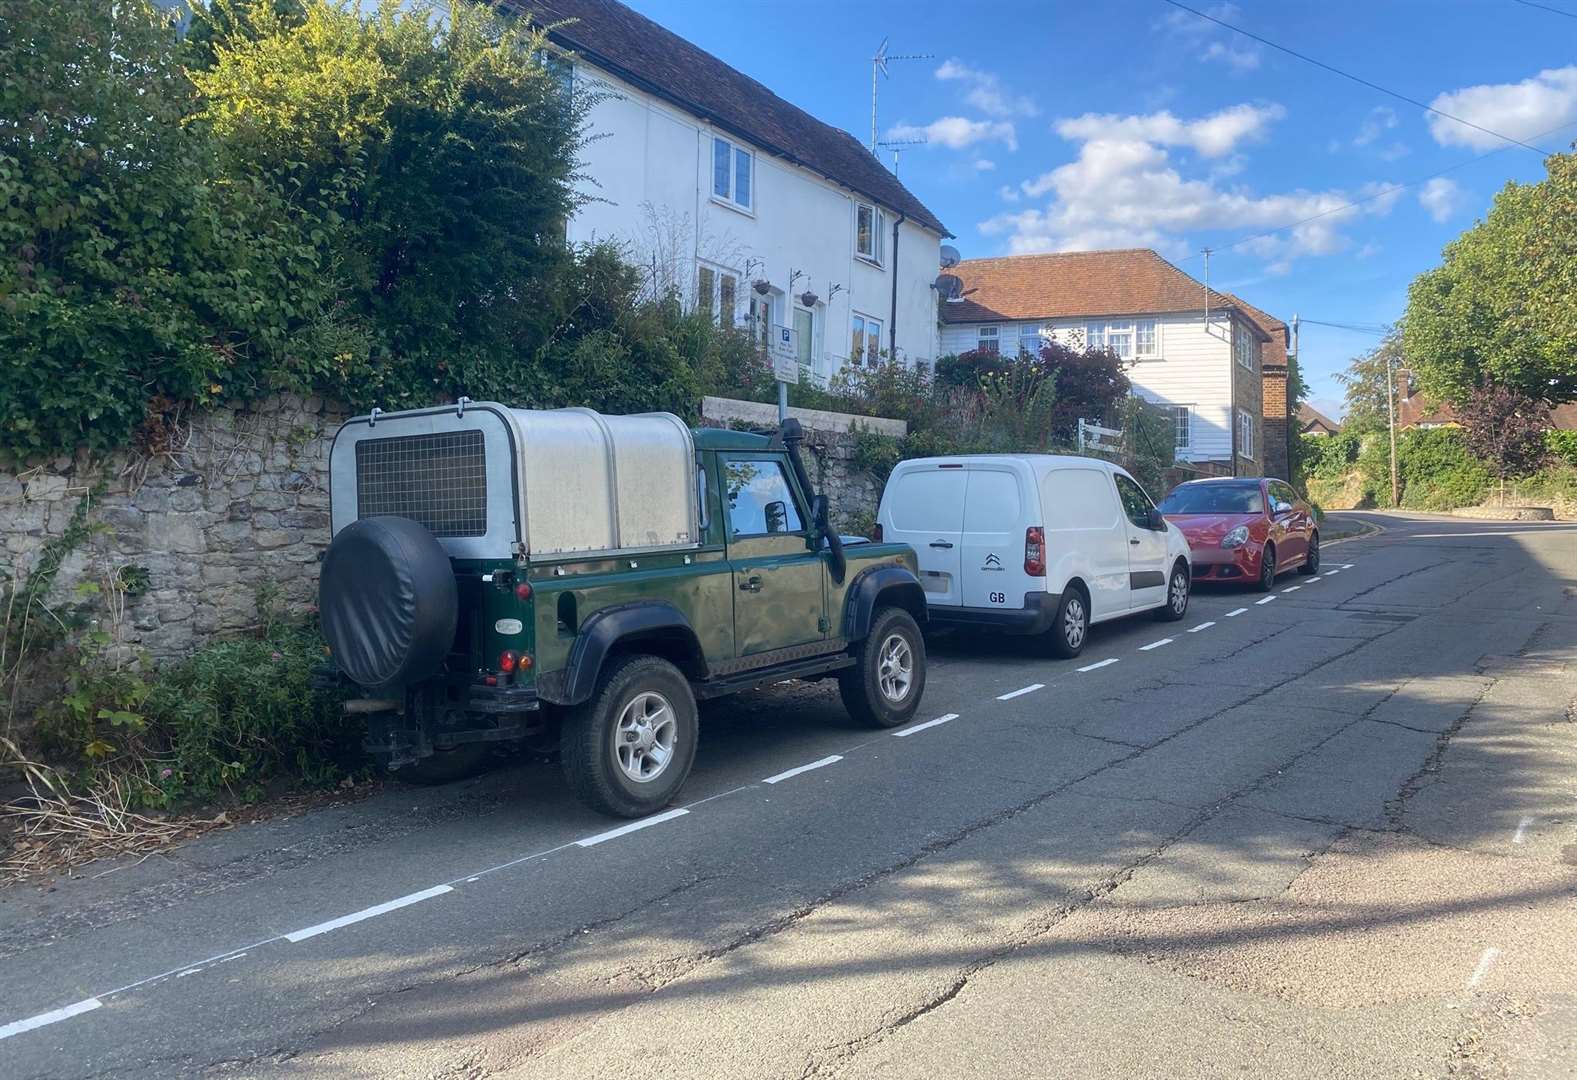 Other parking bays along the road are an average vehicle size